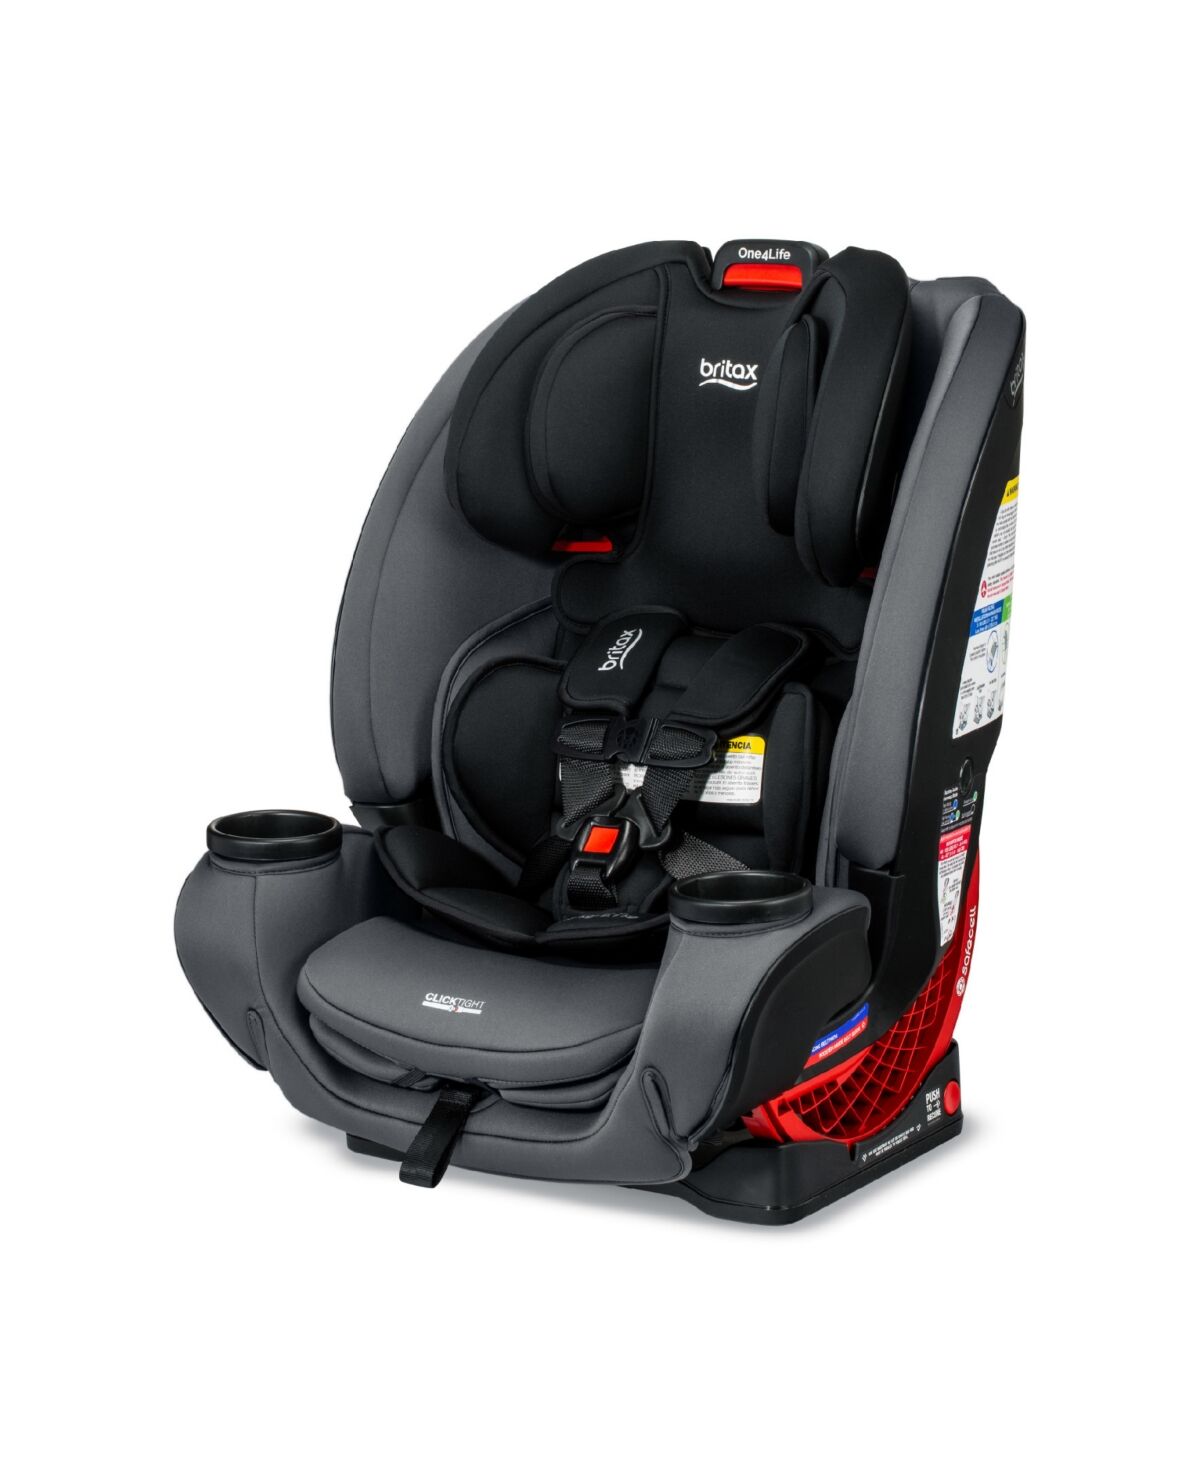 Britax One4Life All-In-One Car Seat - Onyx Stone